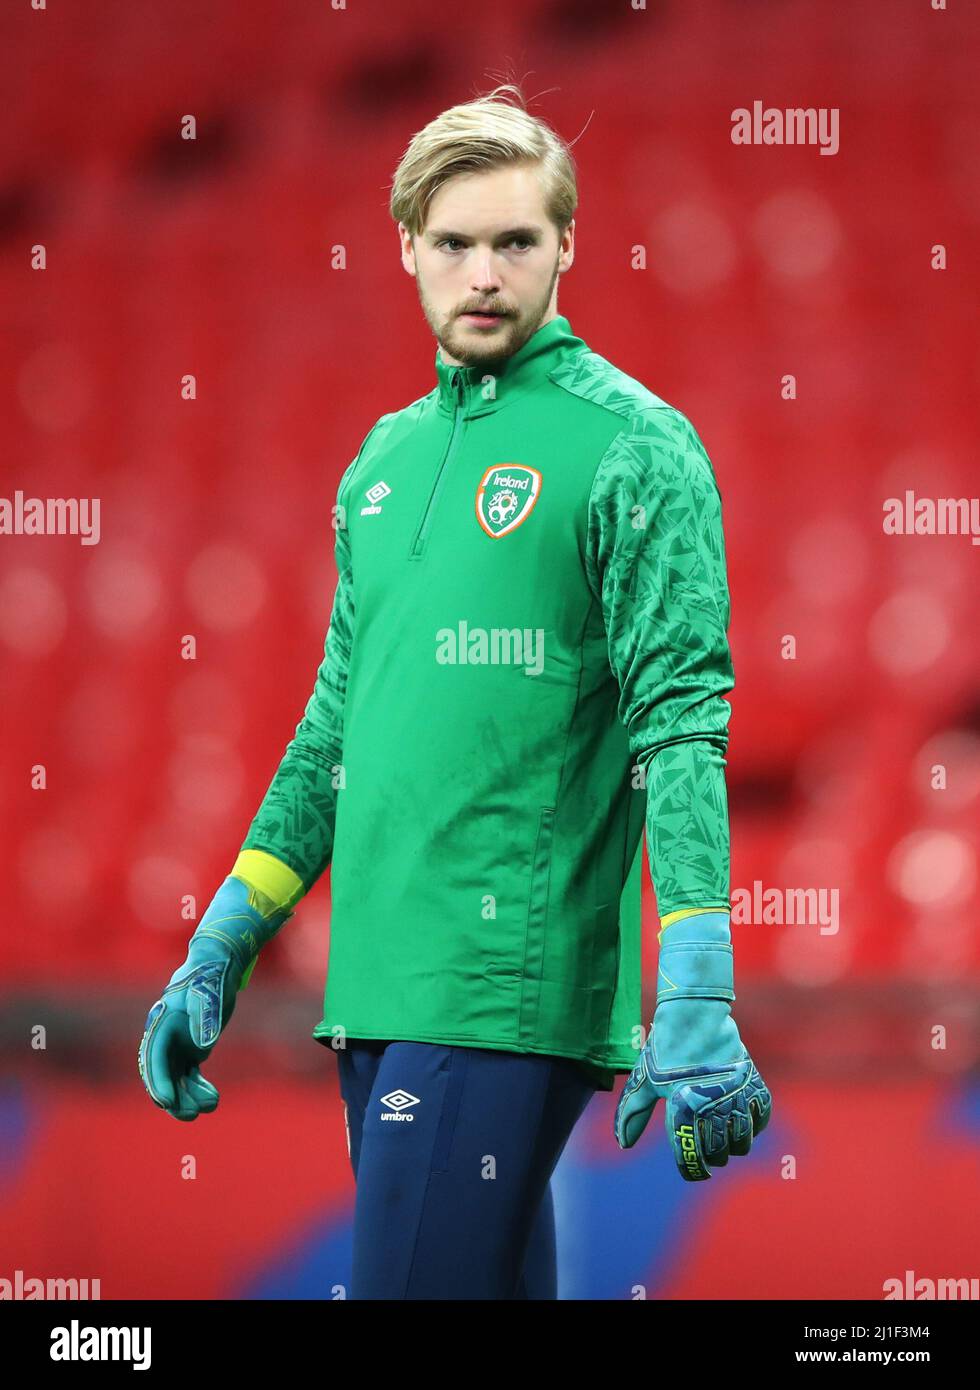 File photo dated 12-11-2020 of Republic of Ireland goalkeeper Caoimhin  Kelleher, who has been handed a chance to make the Republic of Ireland  goalkeeper's jersey his own in Saturday's friendly clash with